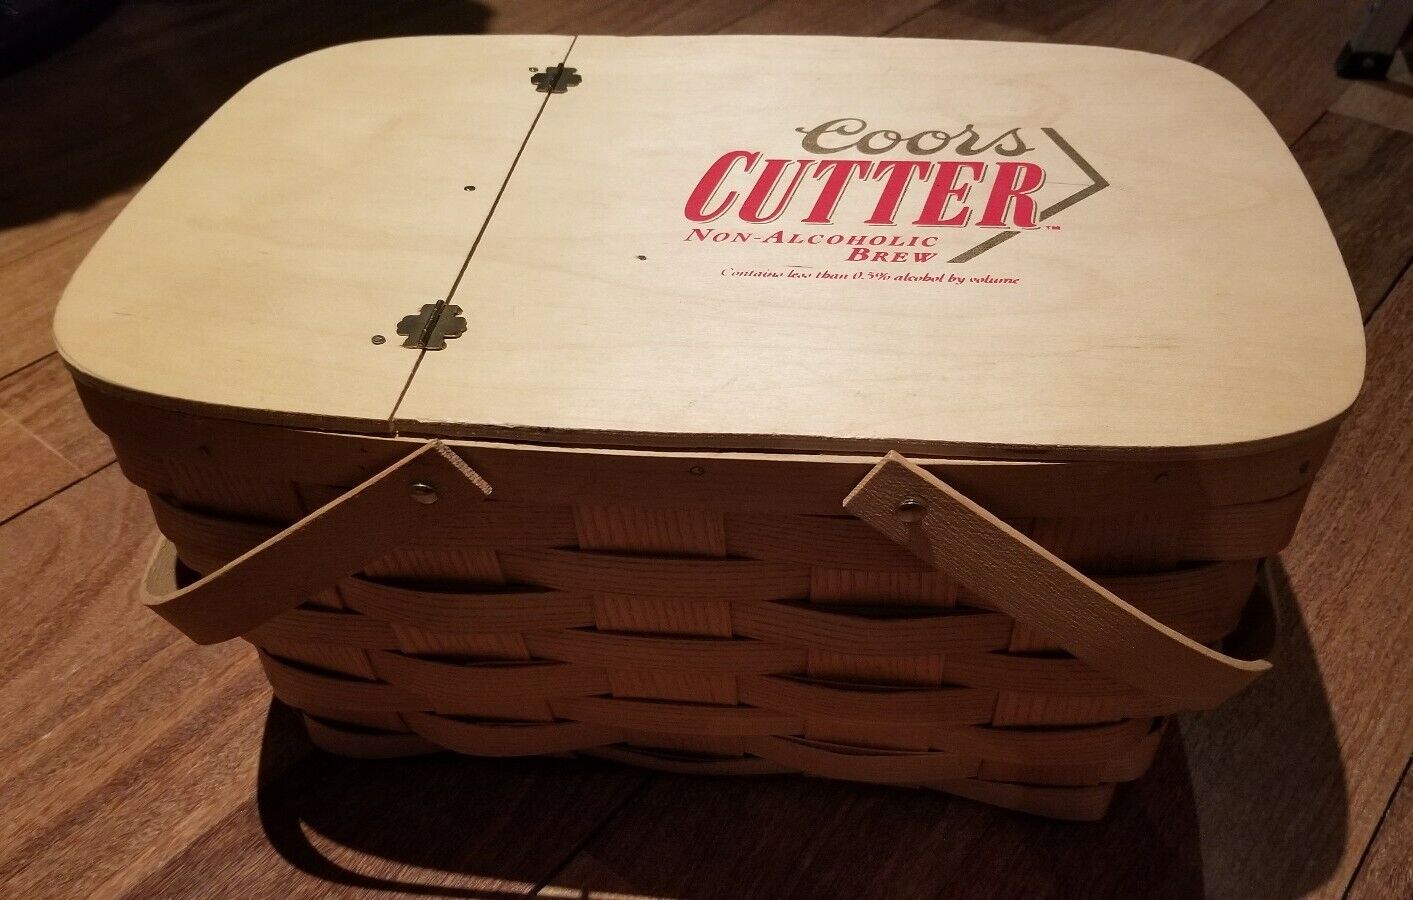 Coors Cutter Non Alcoholic Brew Wooden Picnic Basket Checkers board, gingham 